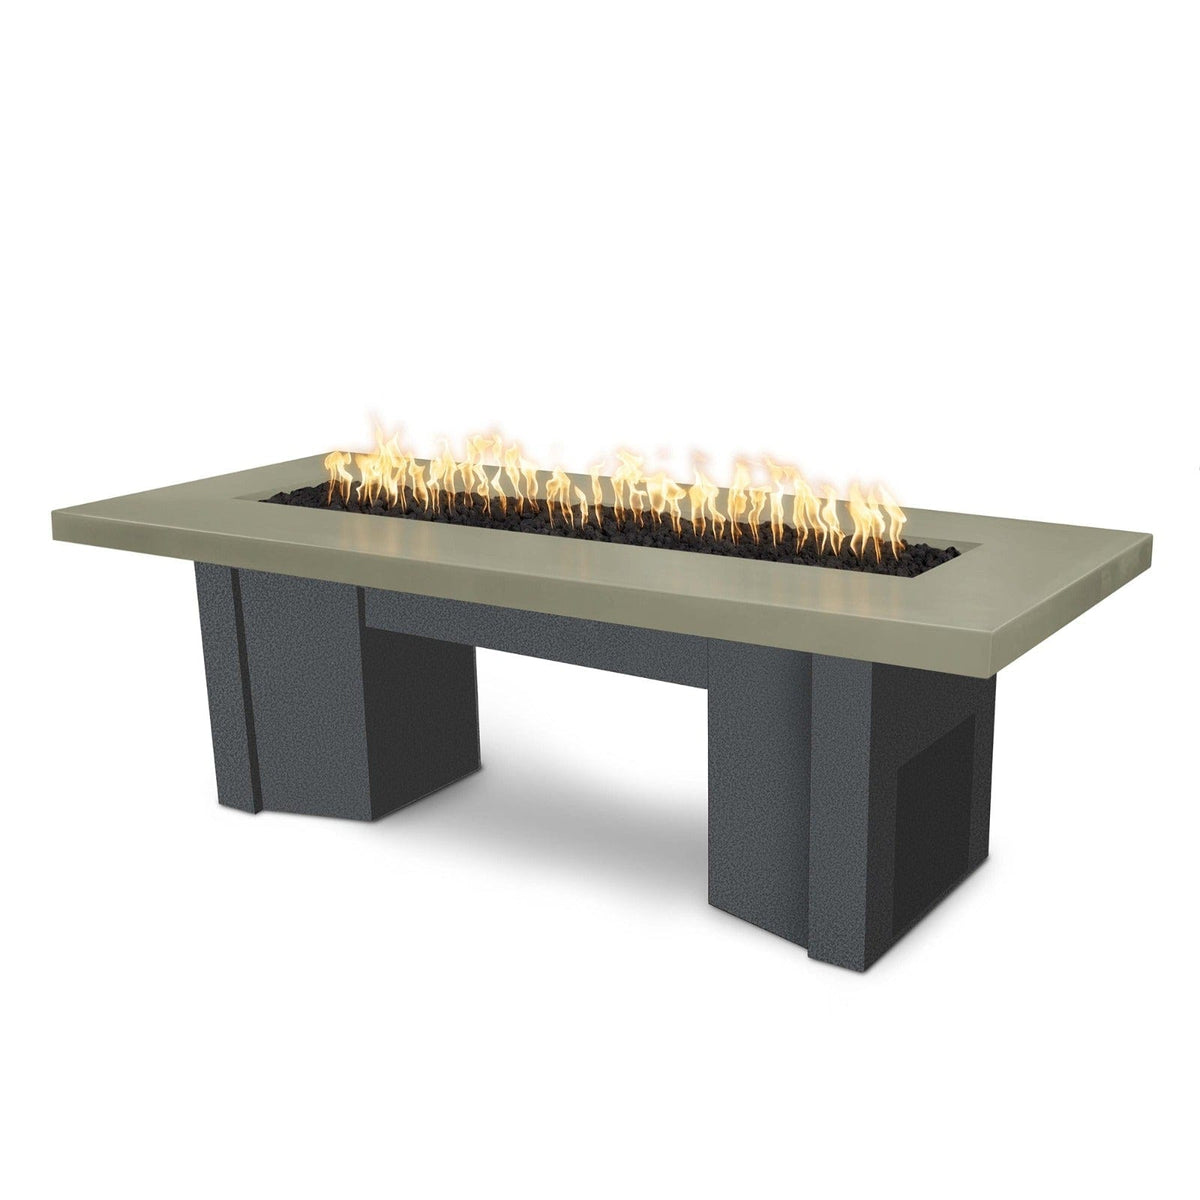 The Outdoor Plus Fire Features Ash (-ASH) / Silver Vein Powder Coated Steel (-SLV) The Outdoor Plus 78&quot; Alameda Fire Table Smooth Concrete in Natural Gas - 110V Plug &amp; Play Electronic Ignition / OPT-ALMGFRC78EKIT-NG